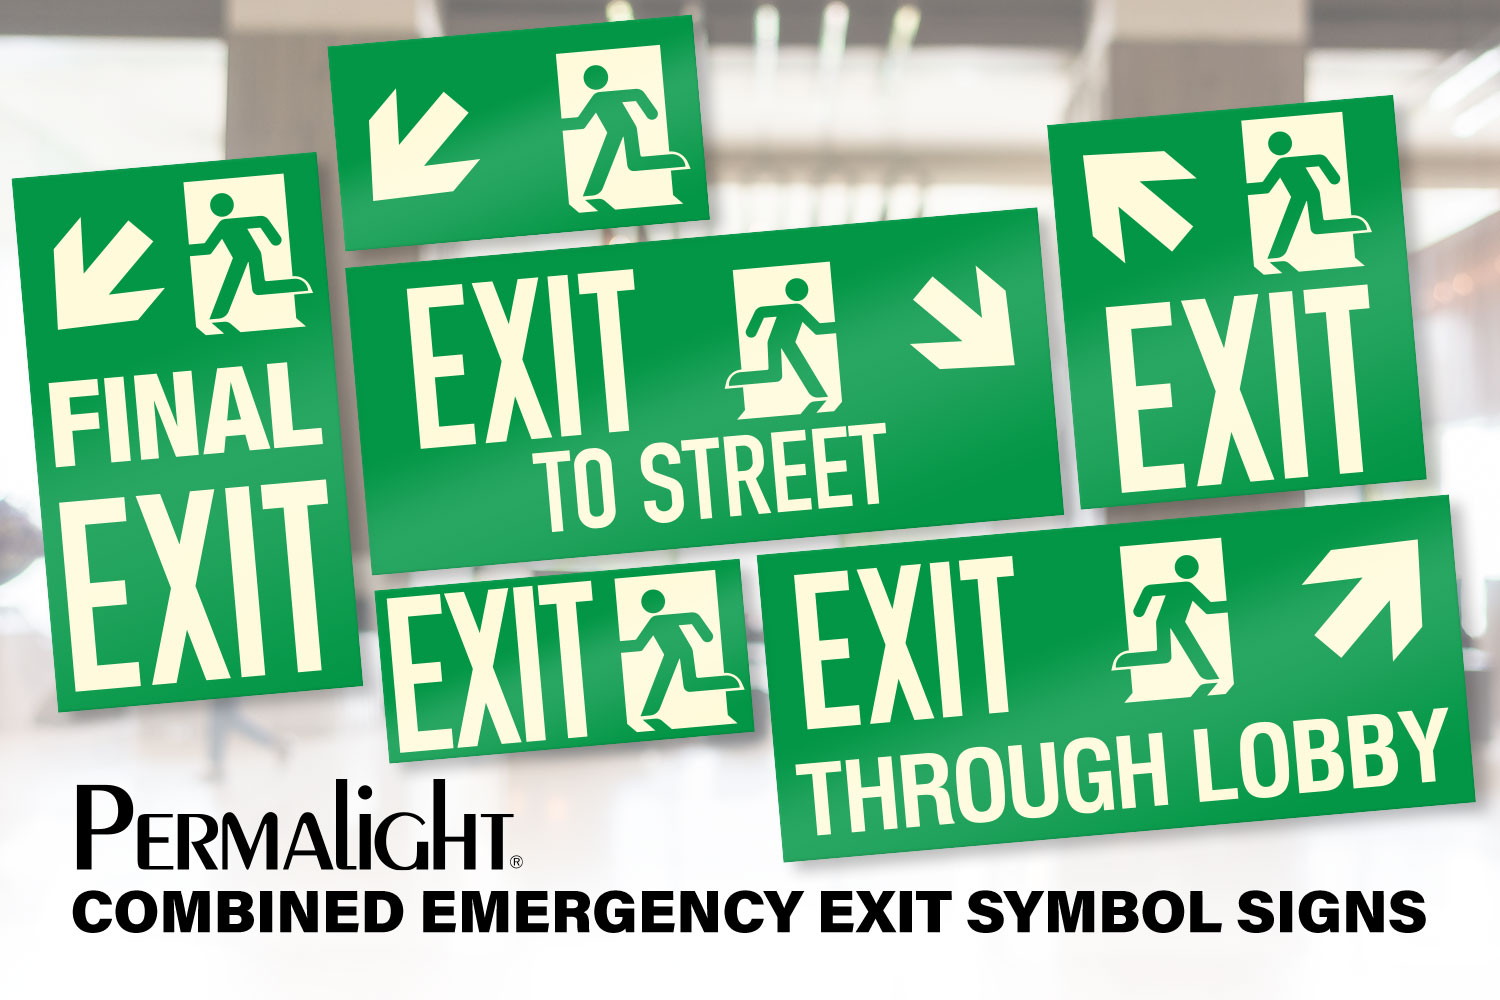 PERMALIGHT® Aluminum Combined Emergency Exit Symbol Signs - New York City Local Law 26 & Local Law 141 Compliant